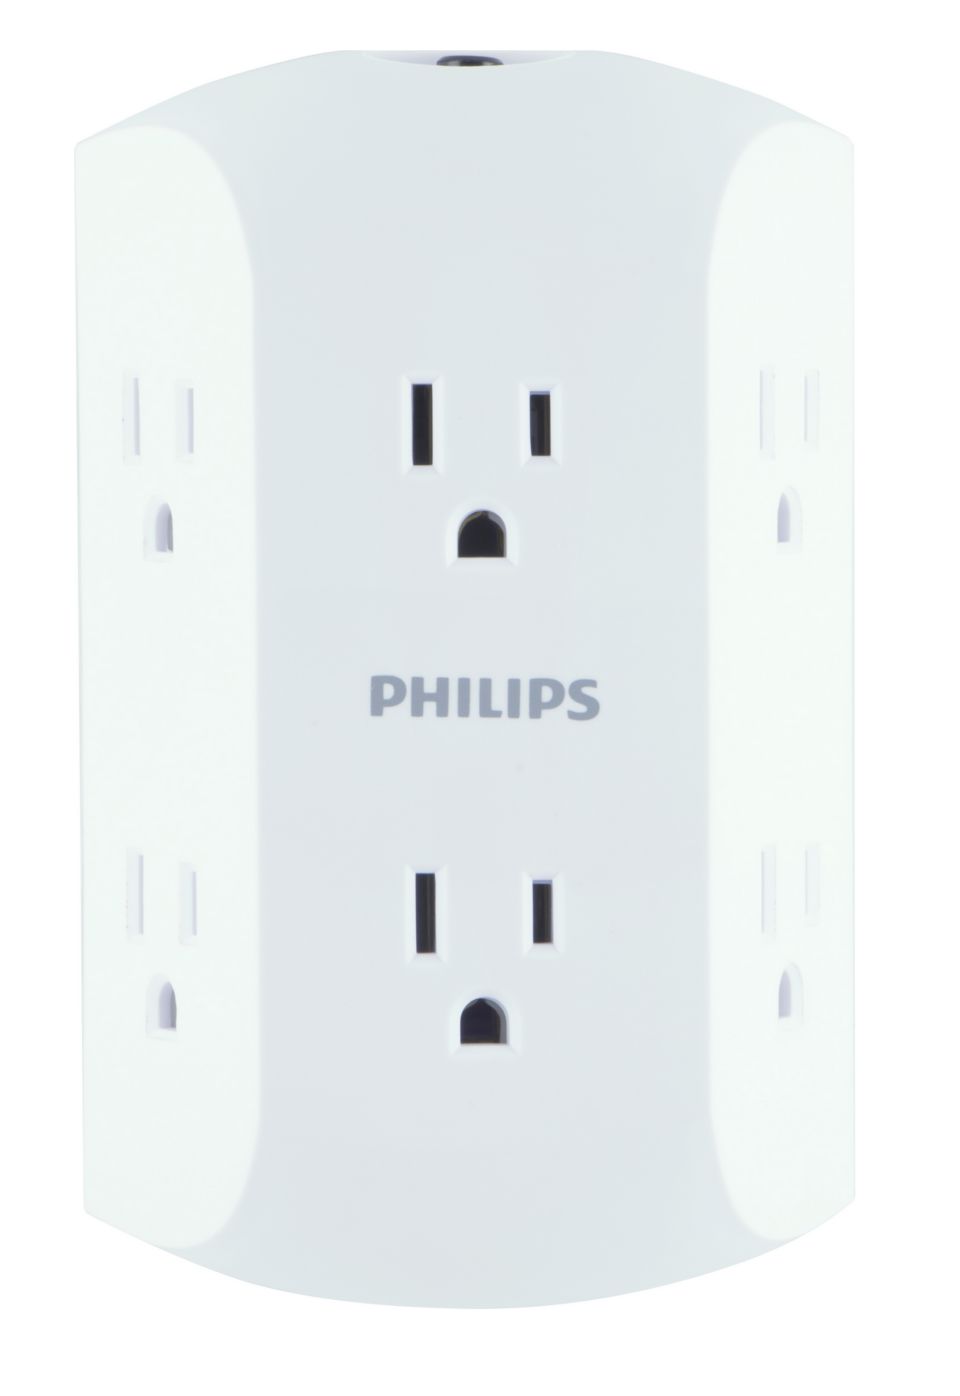 Philips 4-Outlet WiFi Wall Tap, White